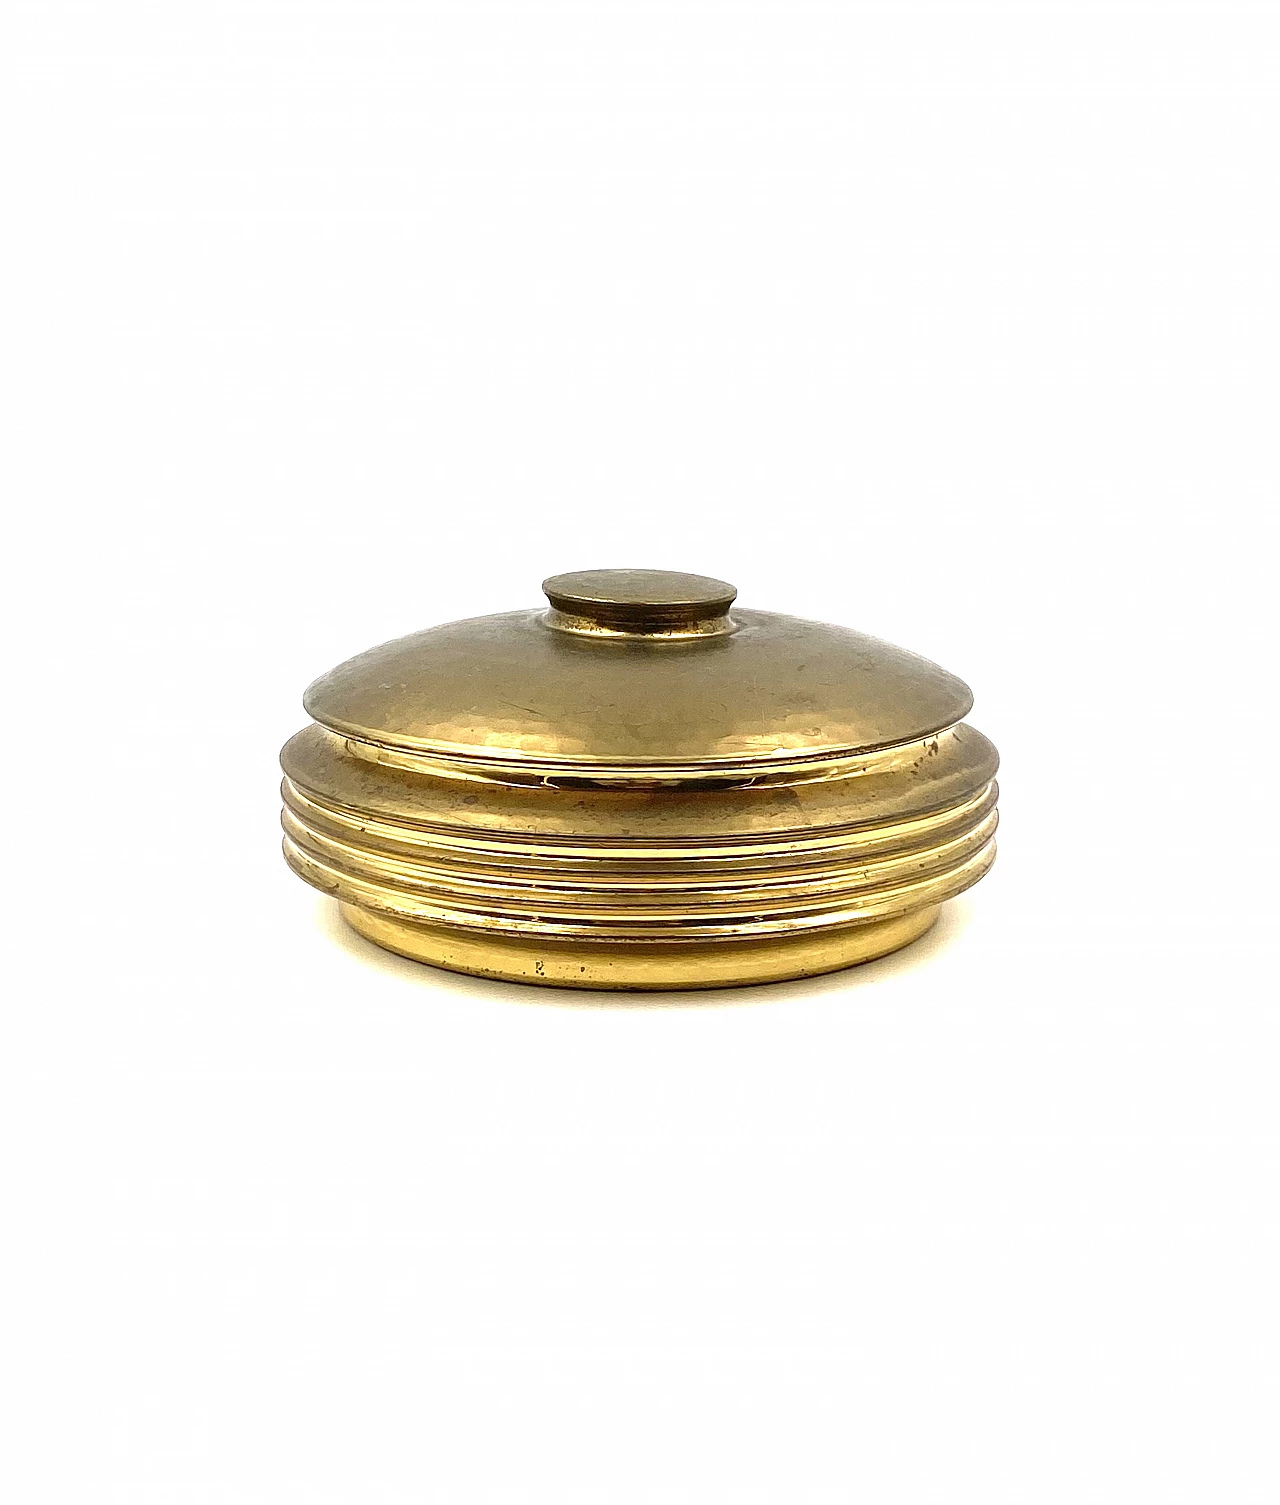 Hand-hammered brass box by Zanetto, 1970s 3